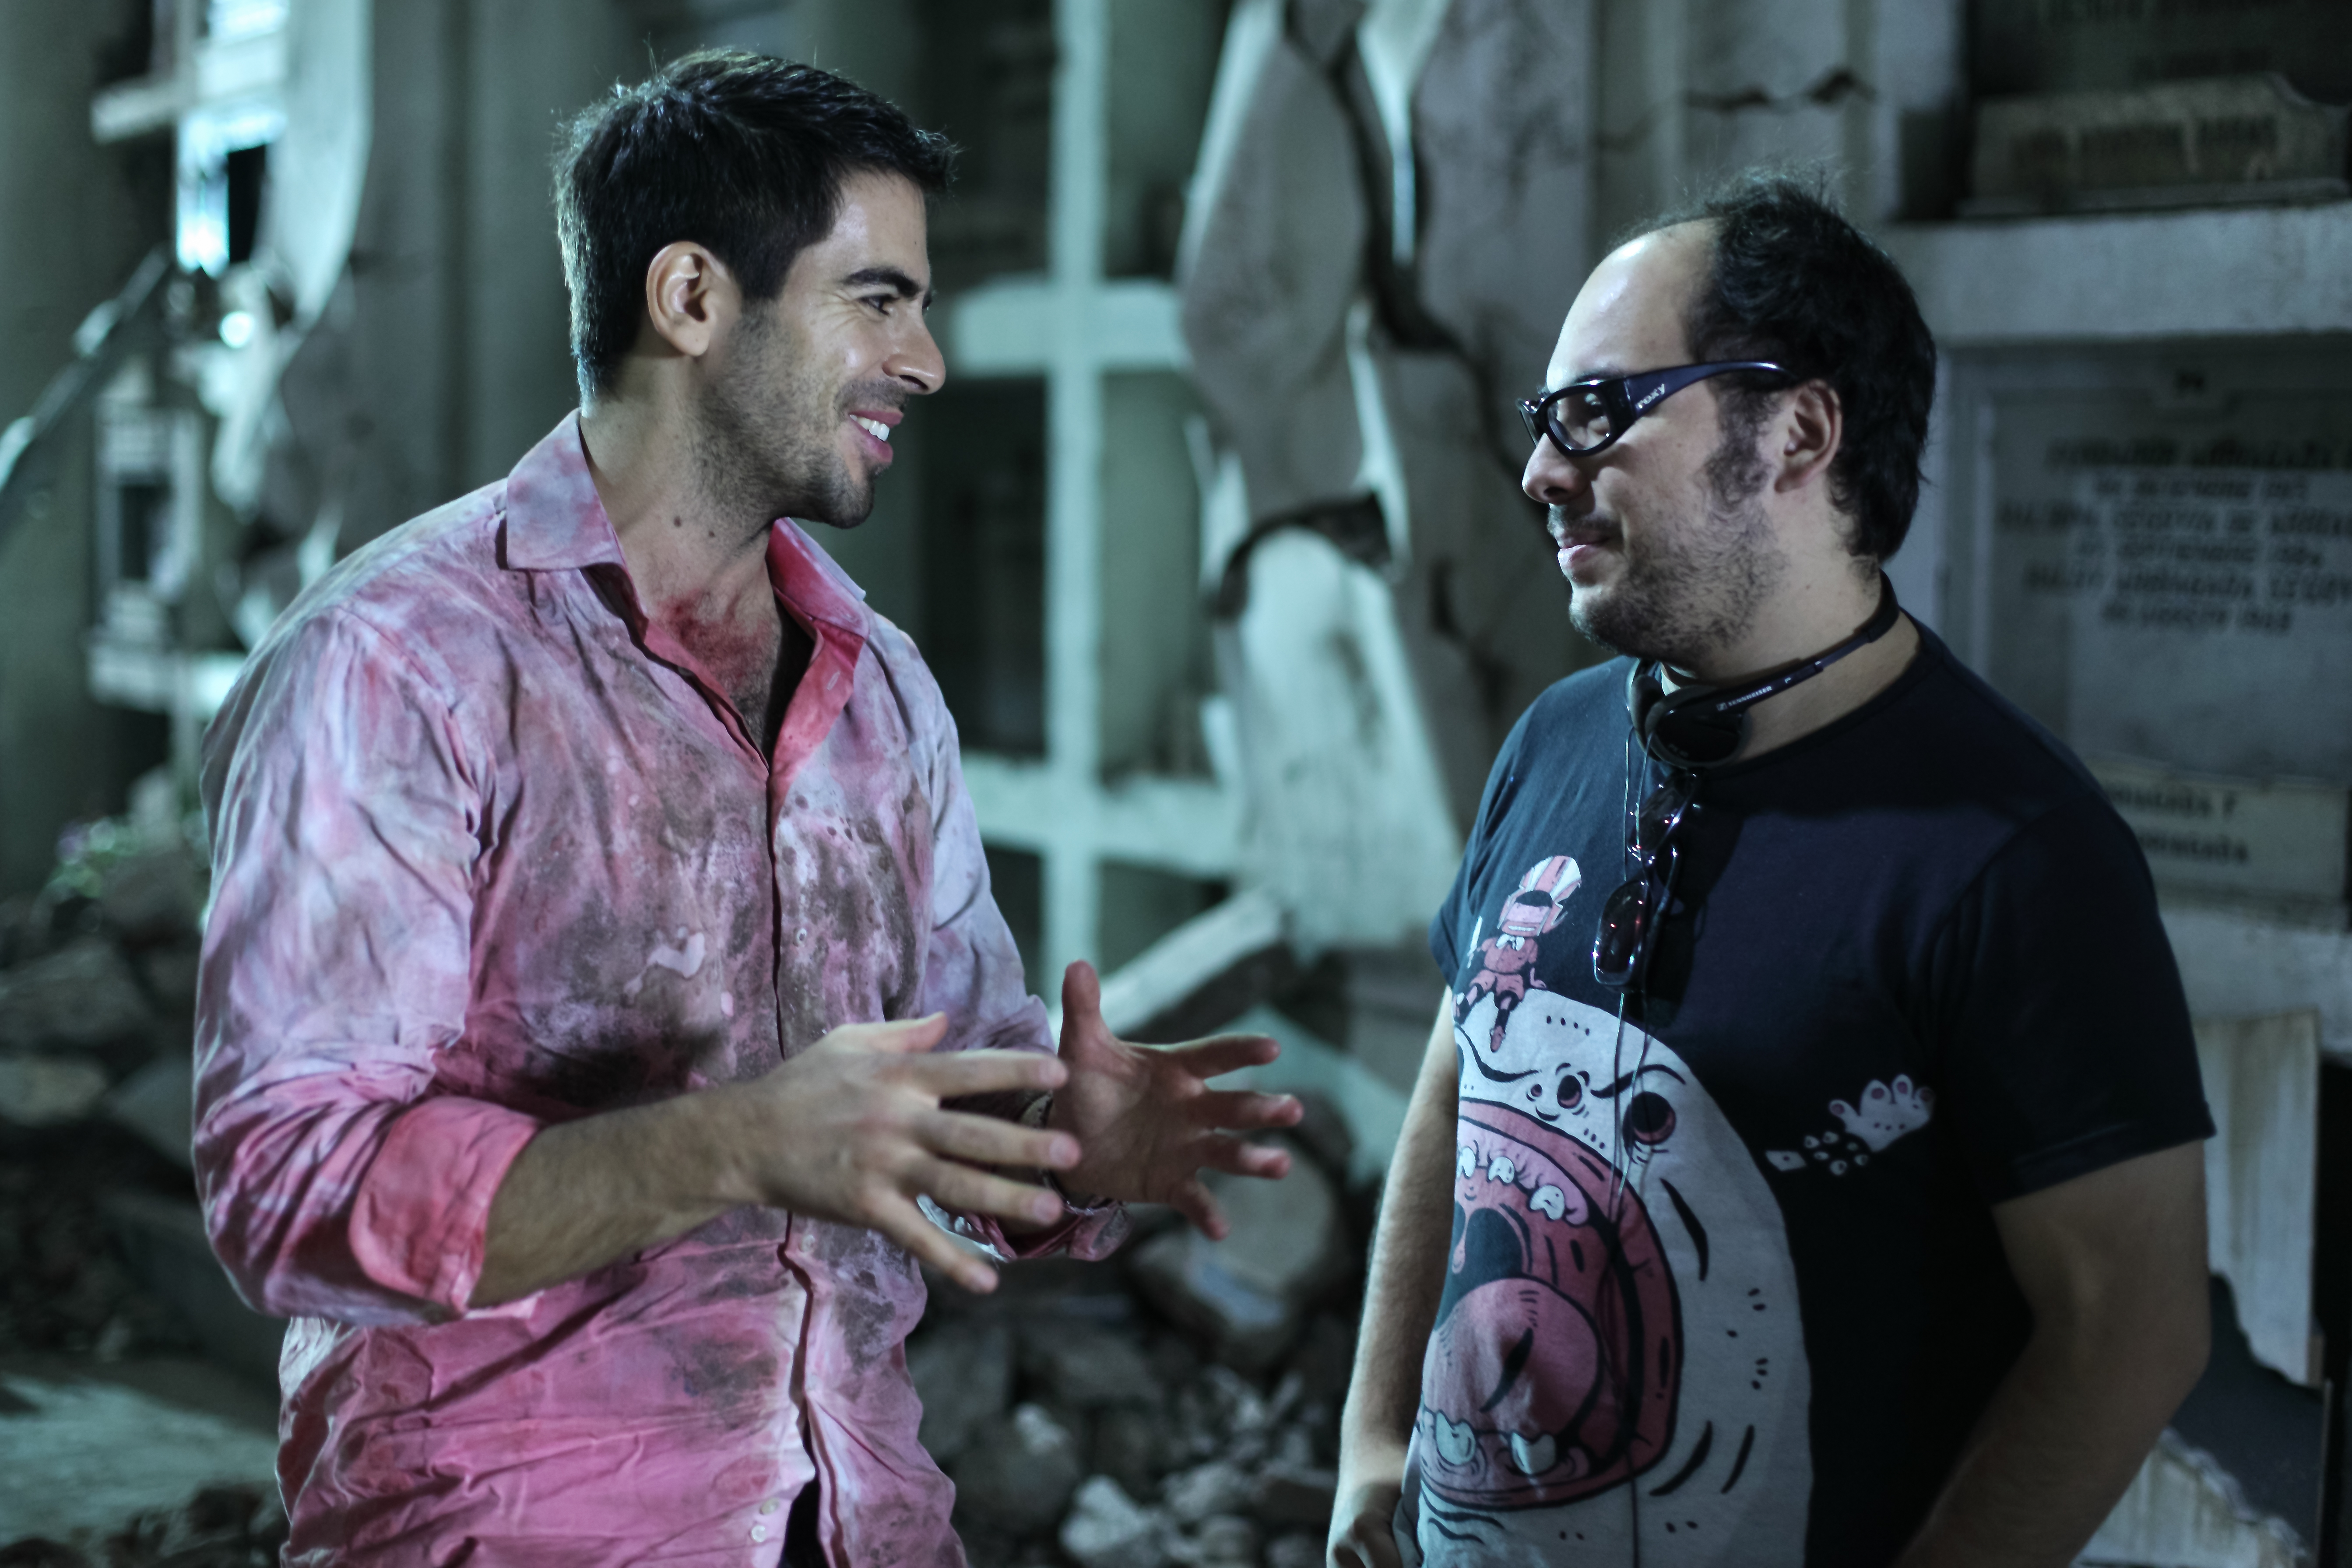 Nicolas Lopez and Eli Roth sharing a moment on the set of Aftershock.